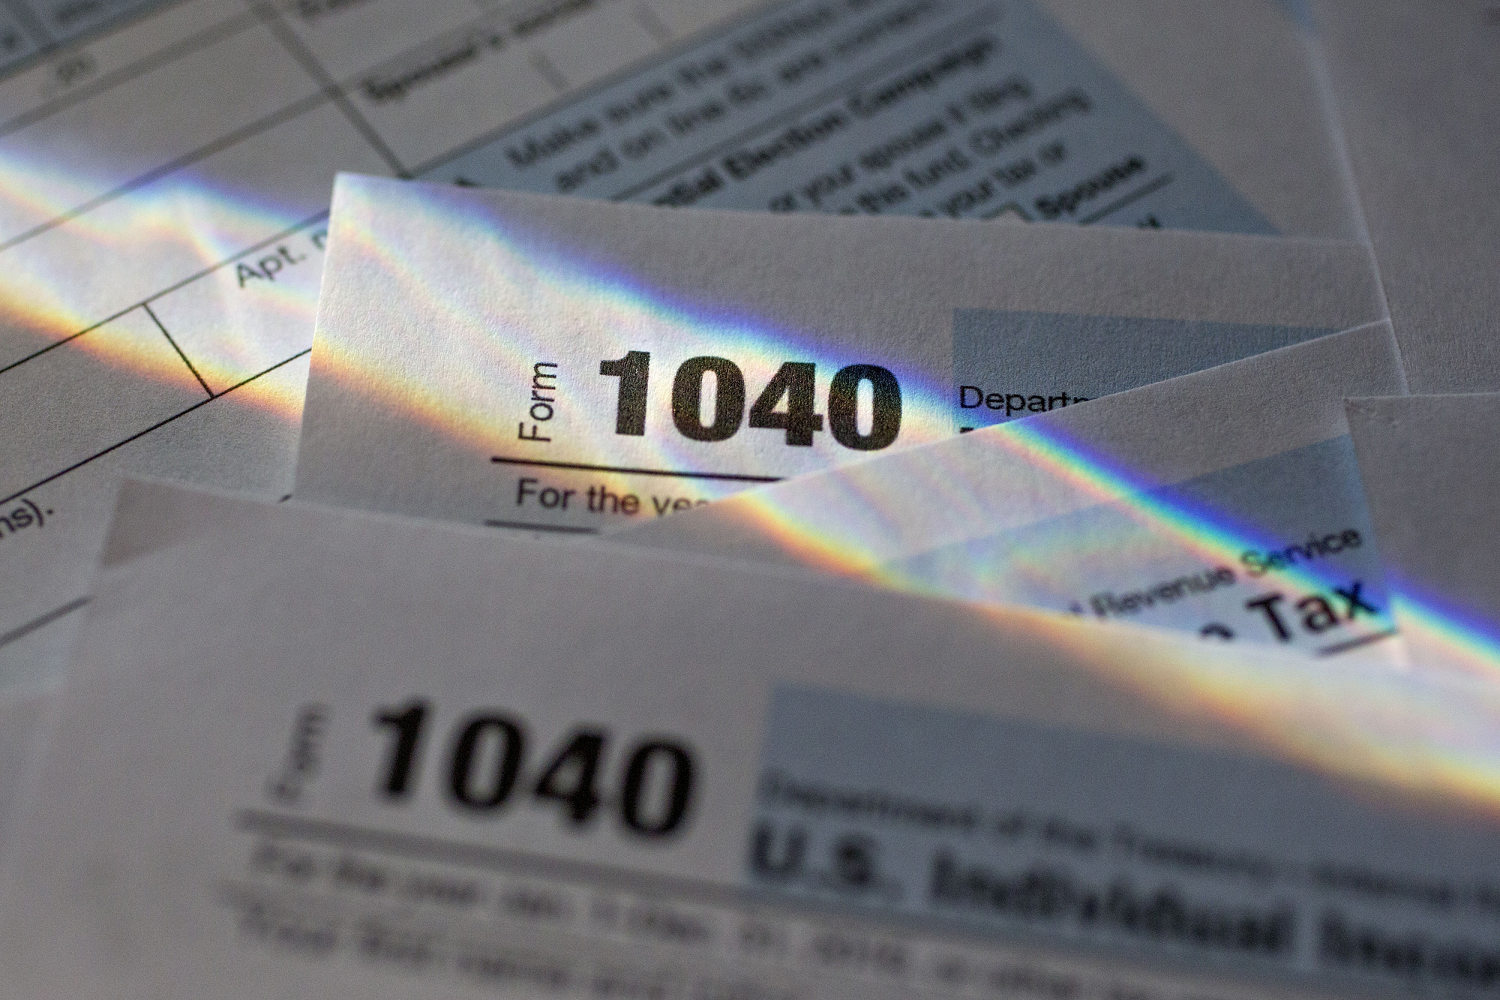 The IRS's new, free 'Direct File' service for simple tax returns is now available in 12 states